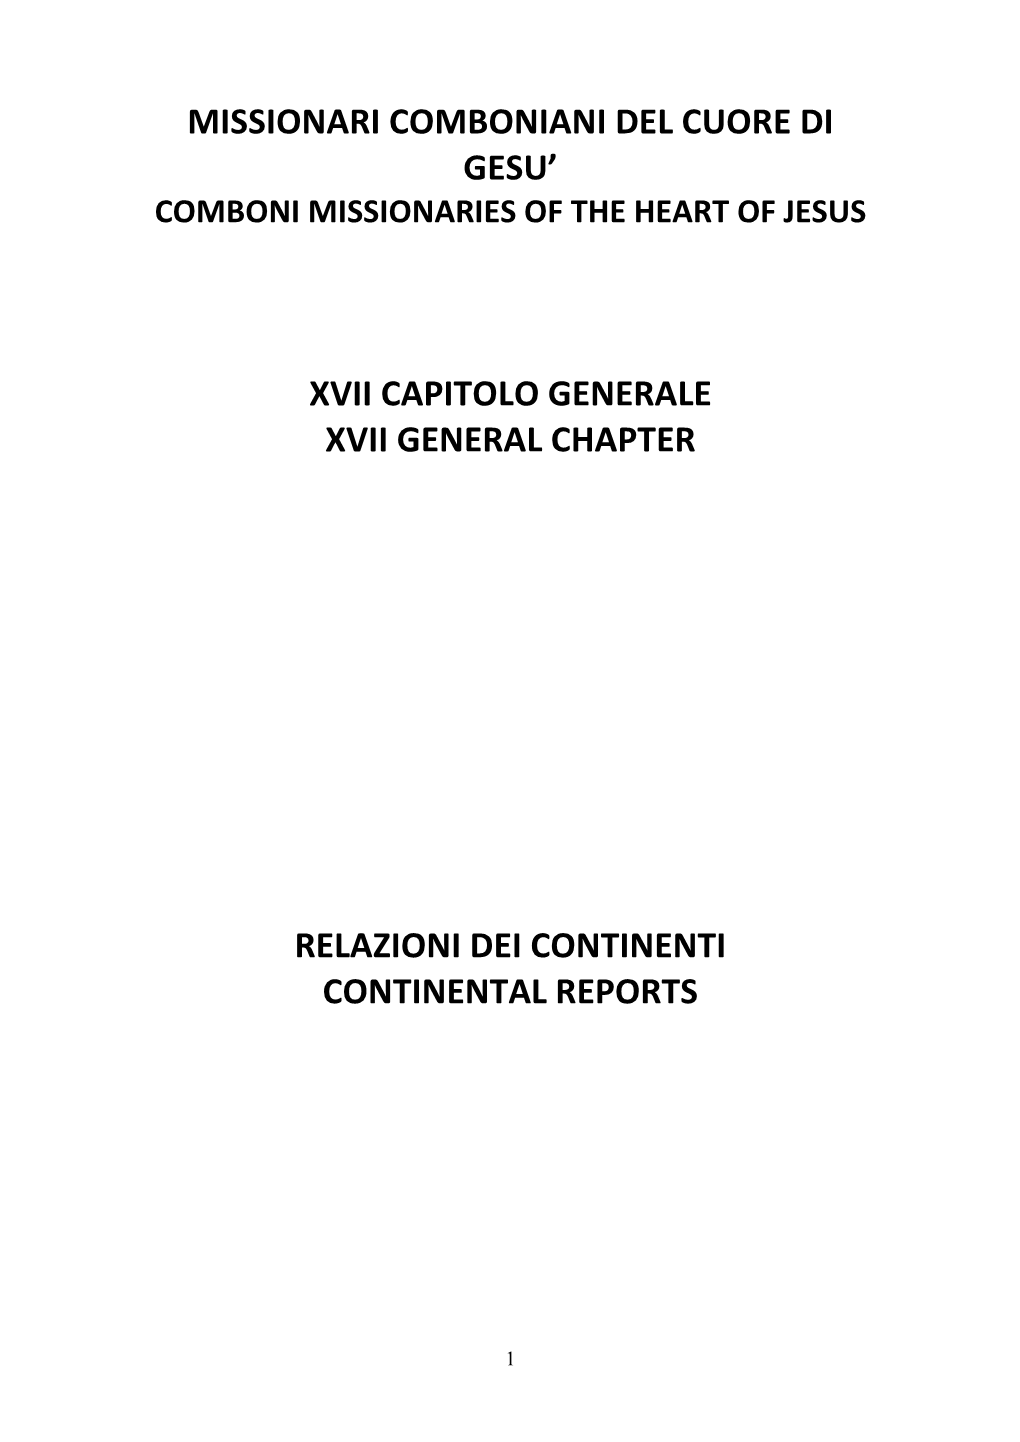 English-Speaking Continental Report